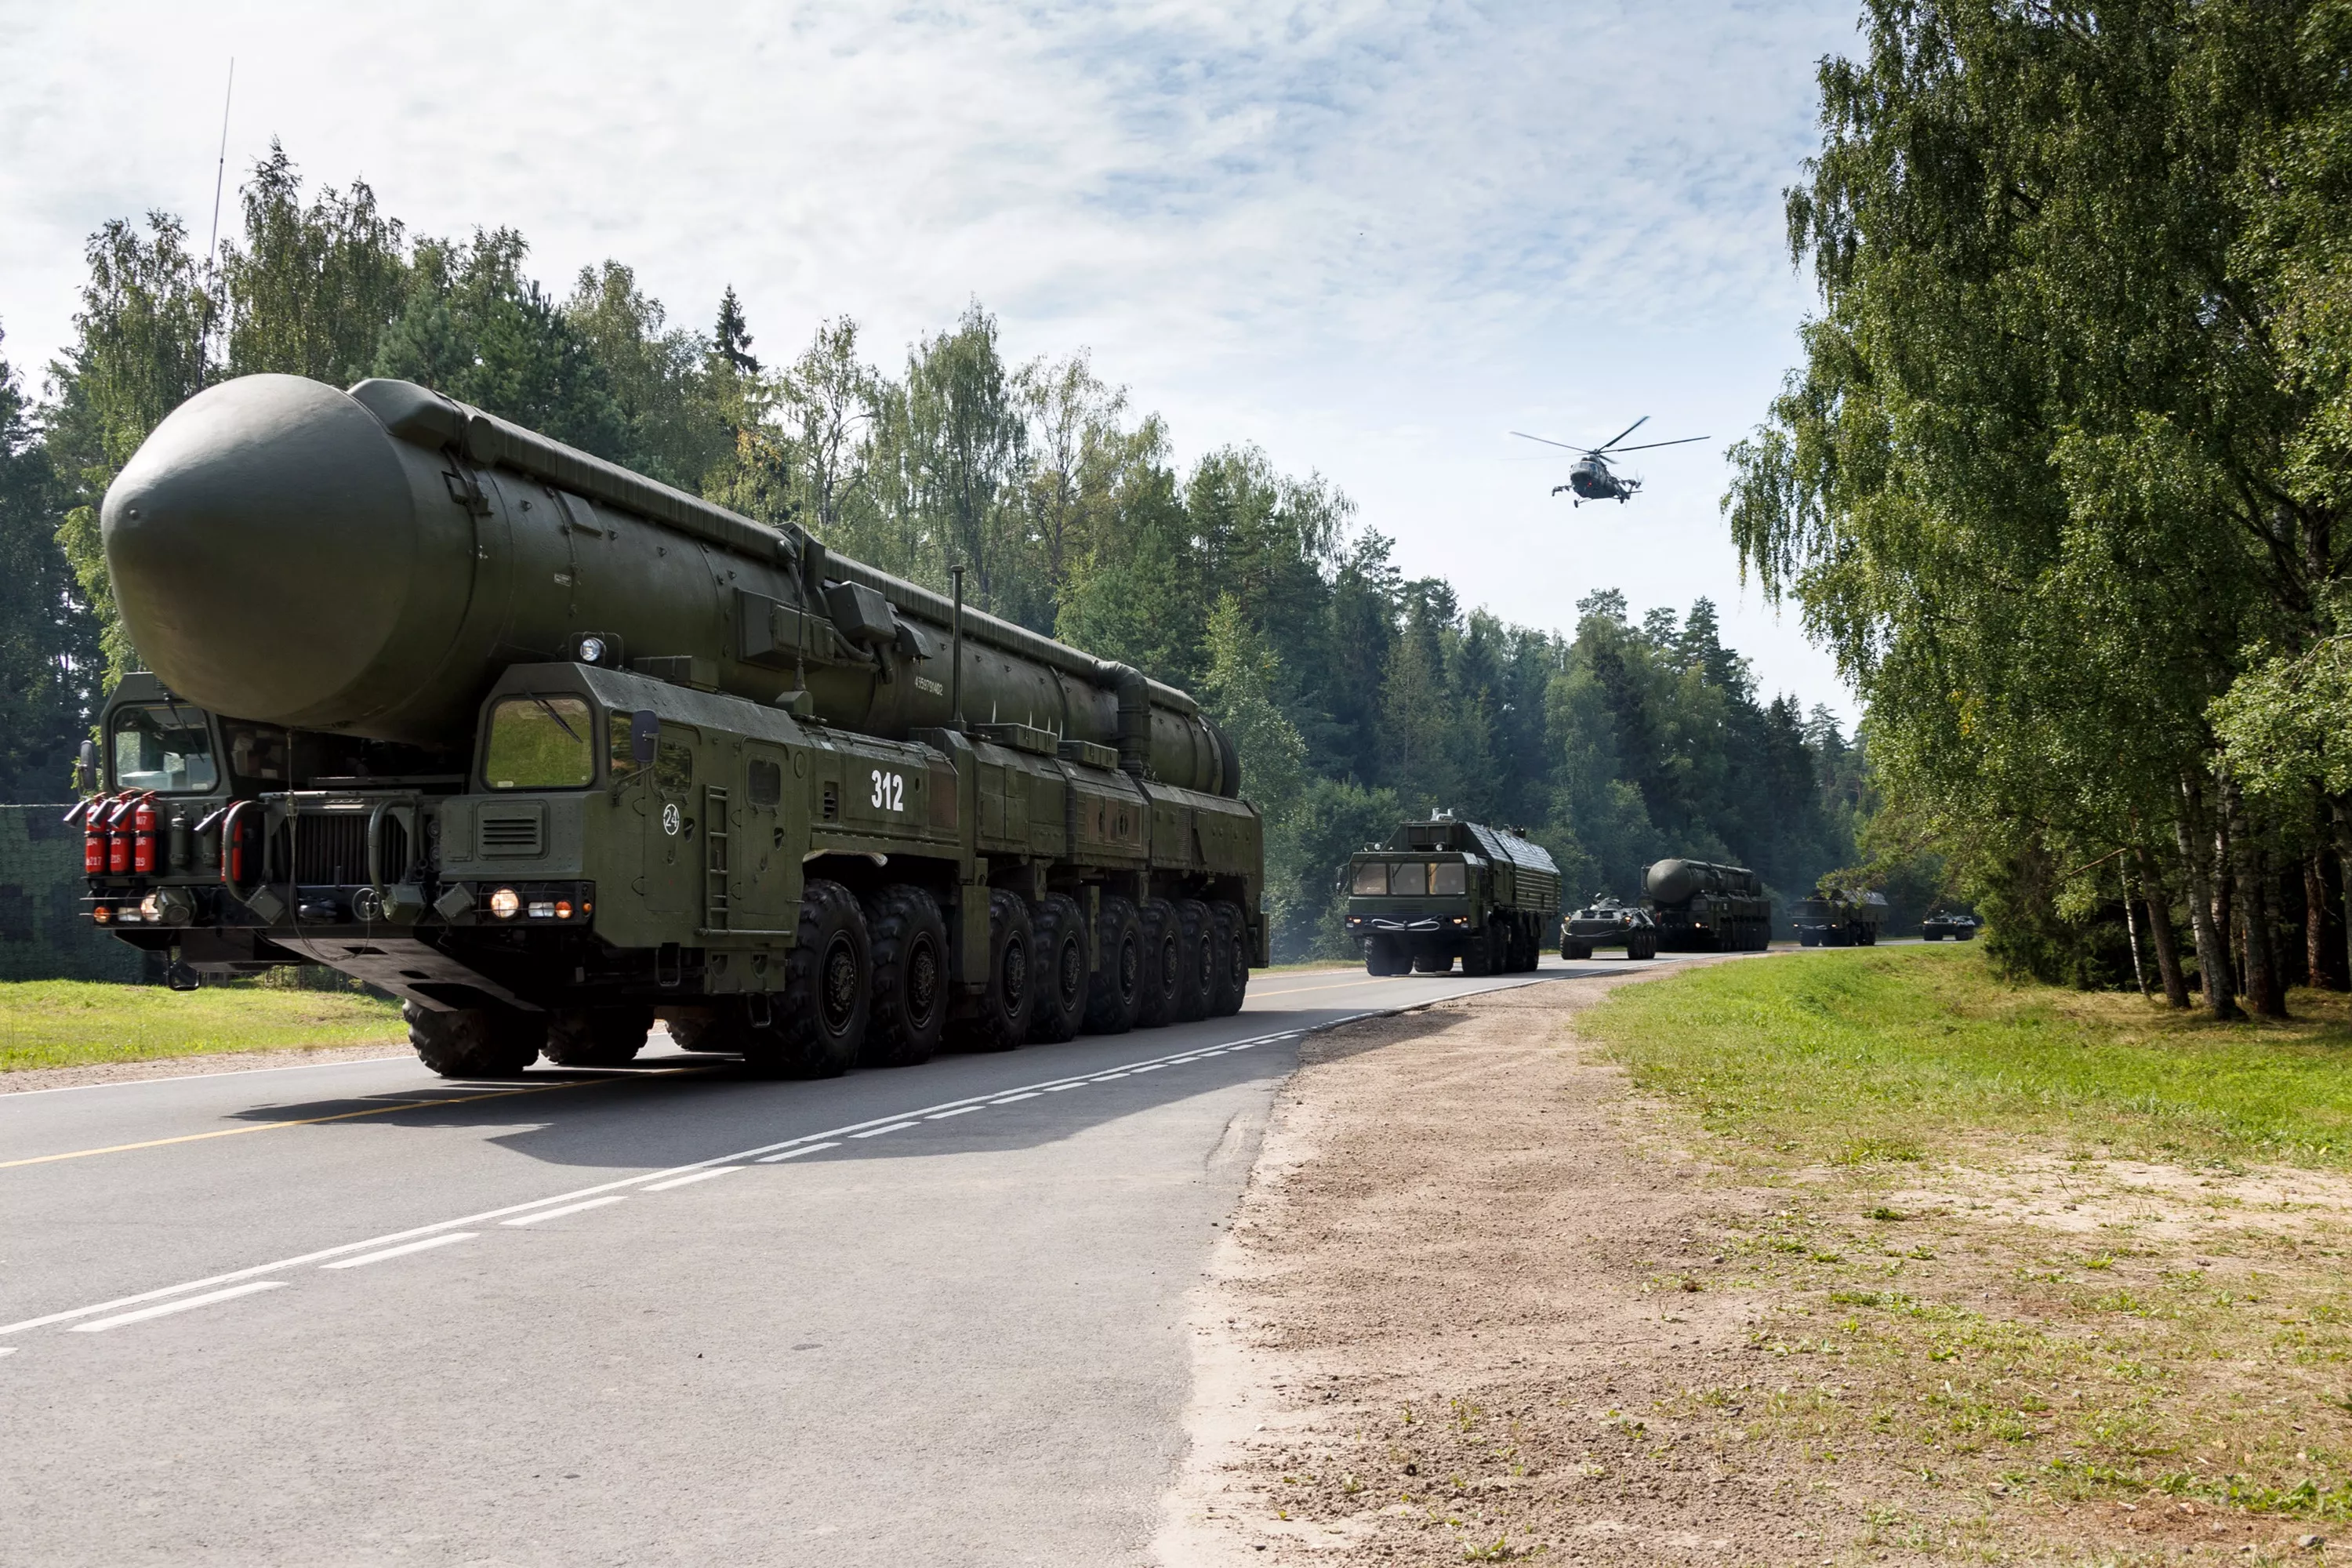 The Russians have launched the SS-27 Mod 2 intercontinental ballistic missile with a range of 12,000 kilometres, which can carry a nuclear warhead with a yield of up to 500 kilotons-8